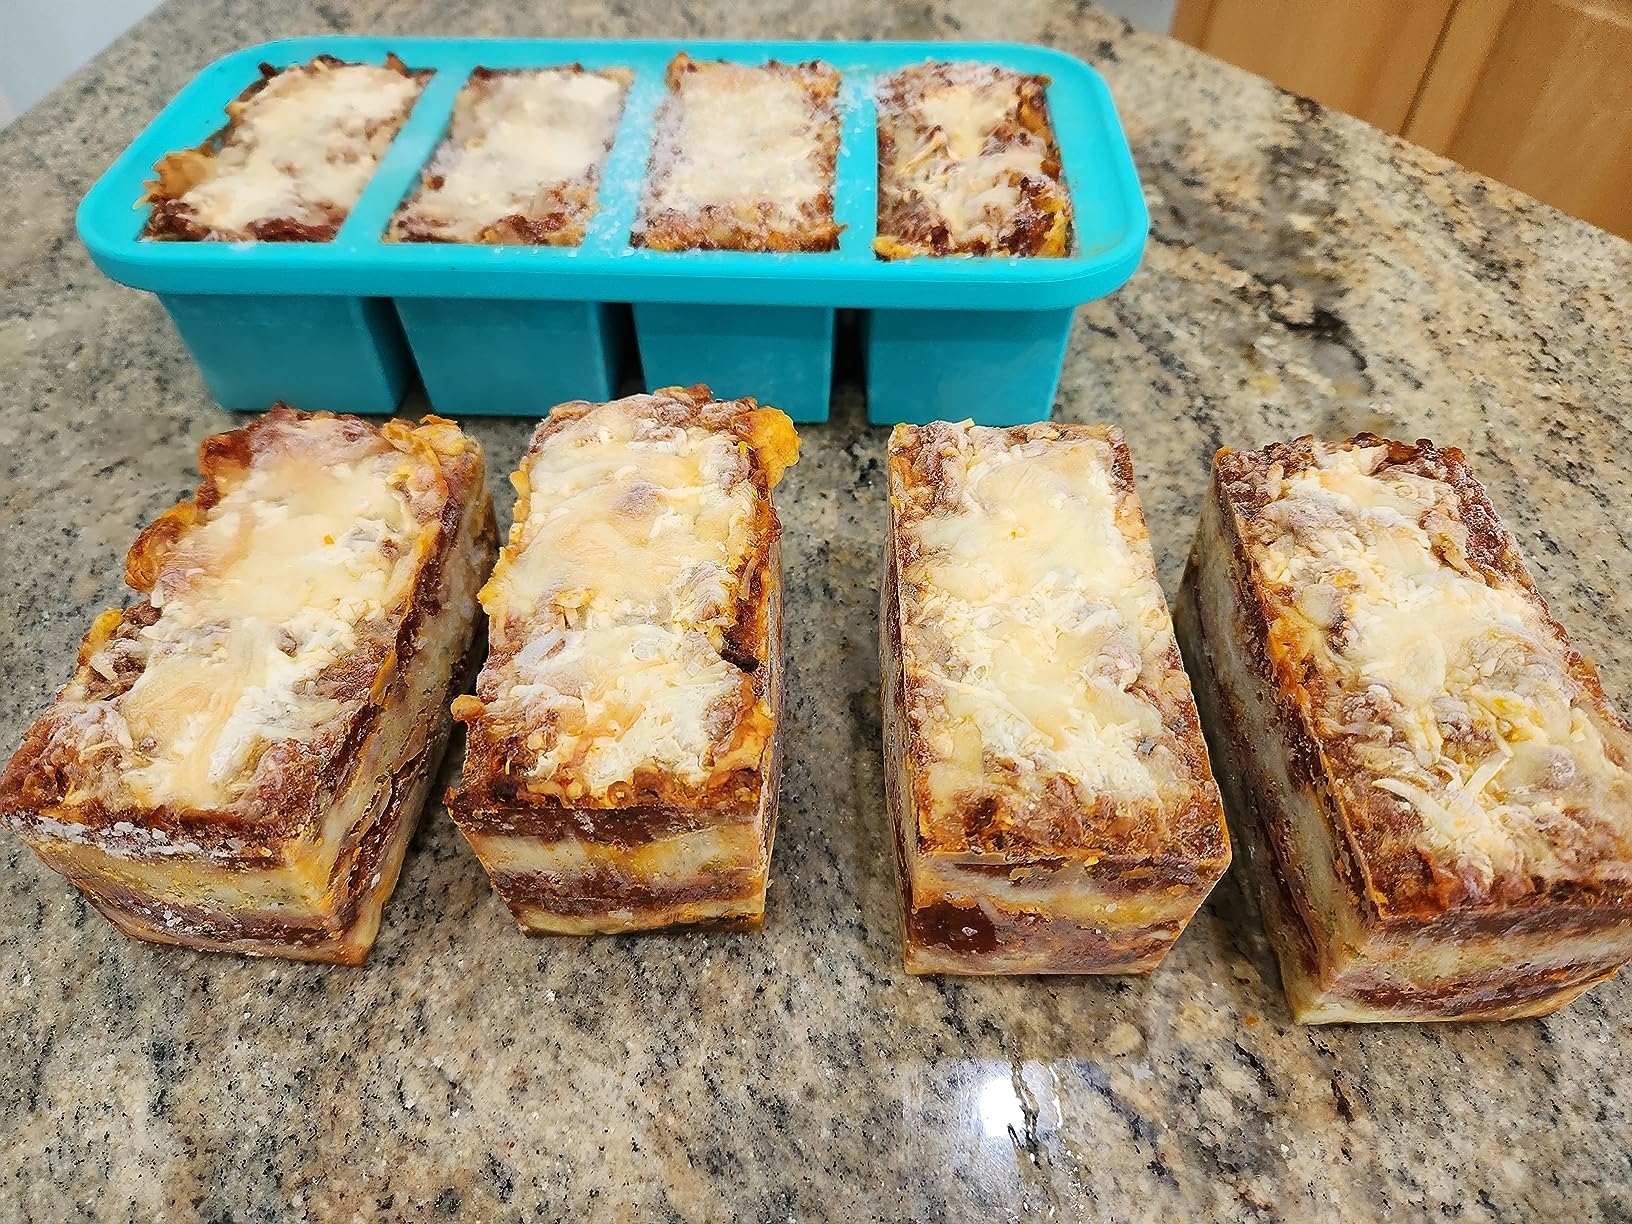 the trays with lasagna inside